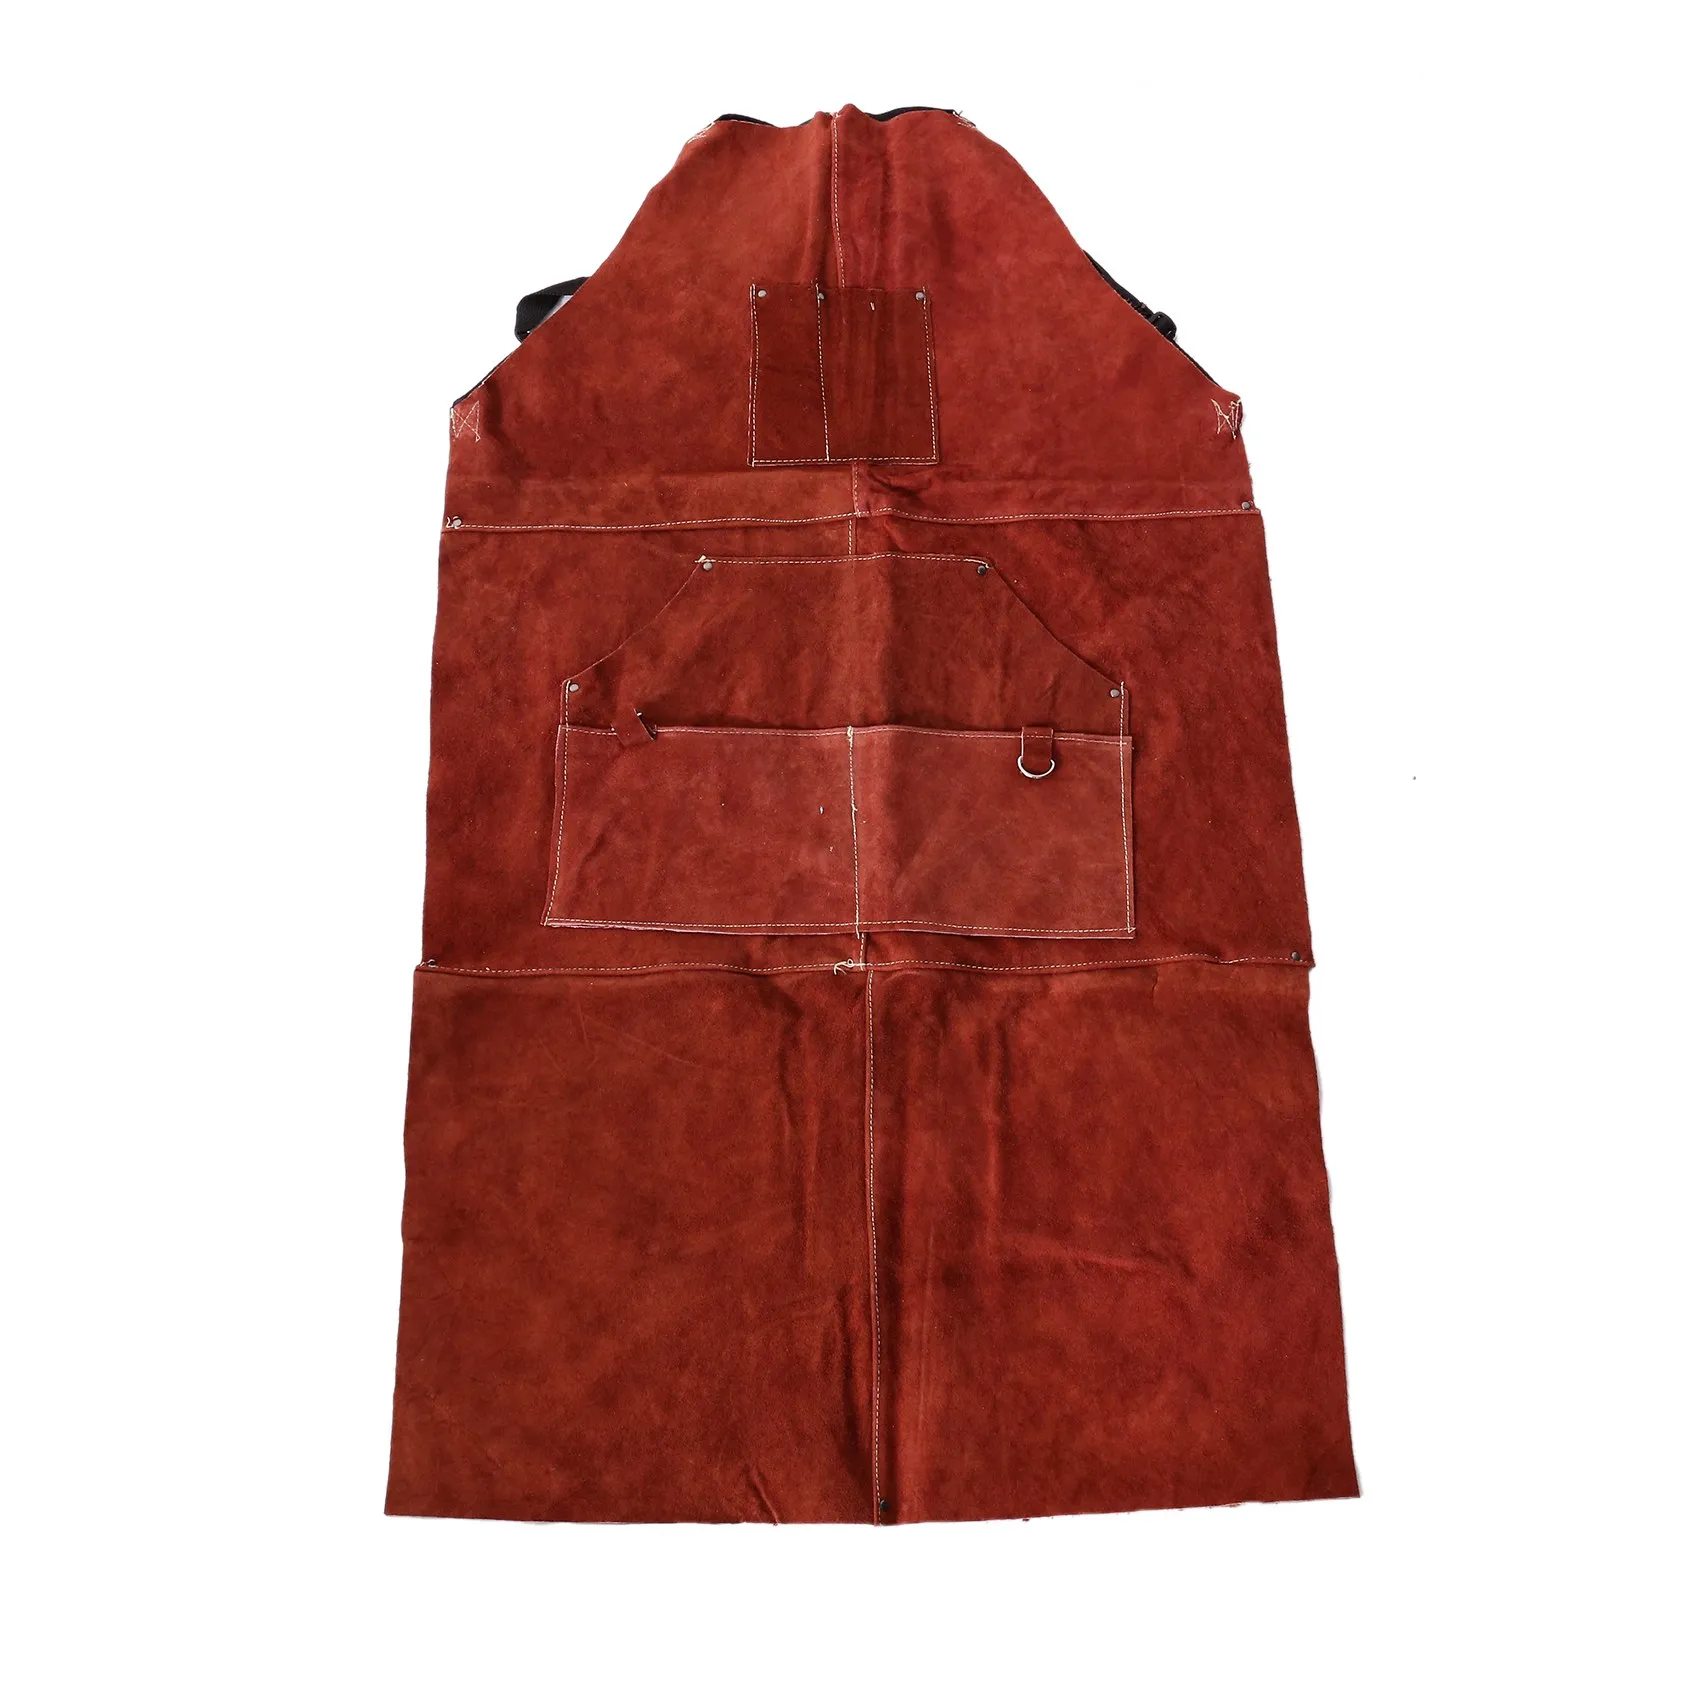 

Leather Welding Apron - Heat & Flame-Resistant Heavy Duty Work Forge Apron with 6 Pockets, 42Inch Large